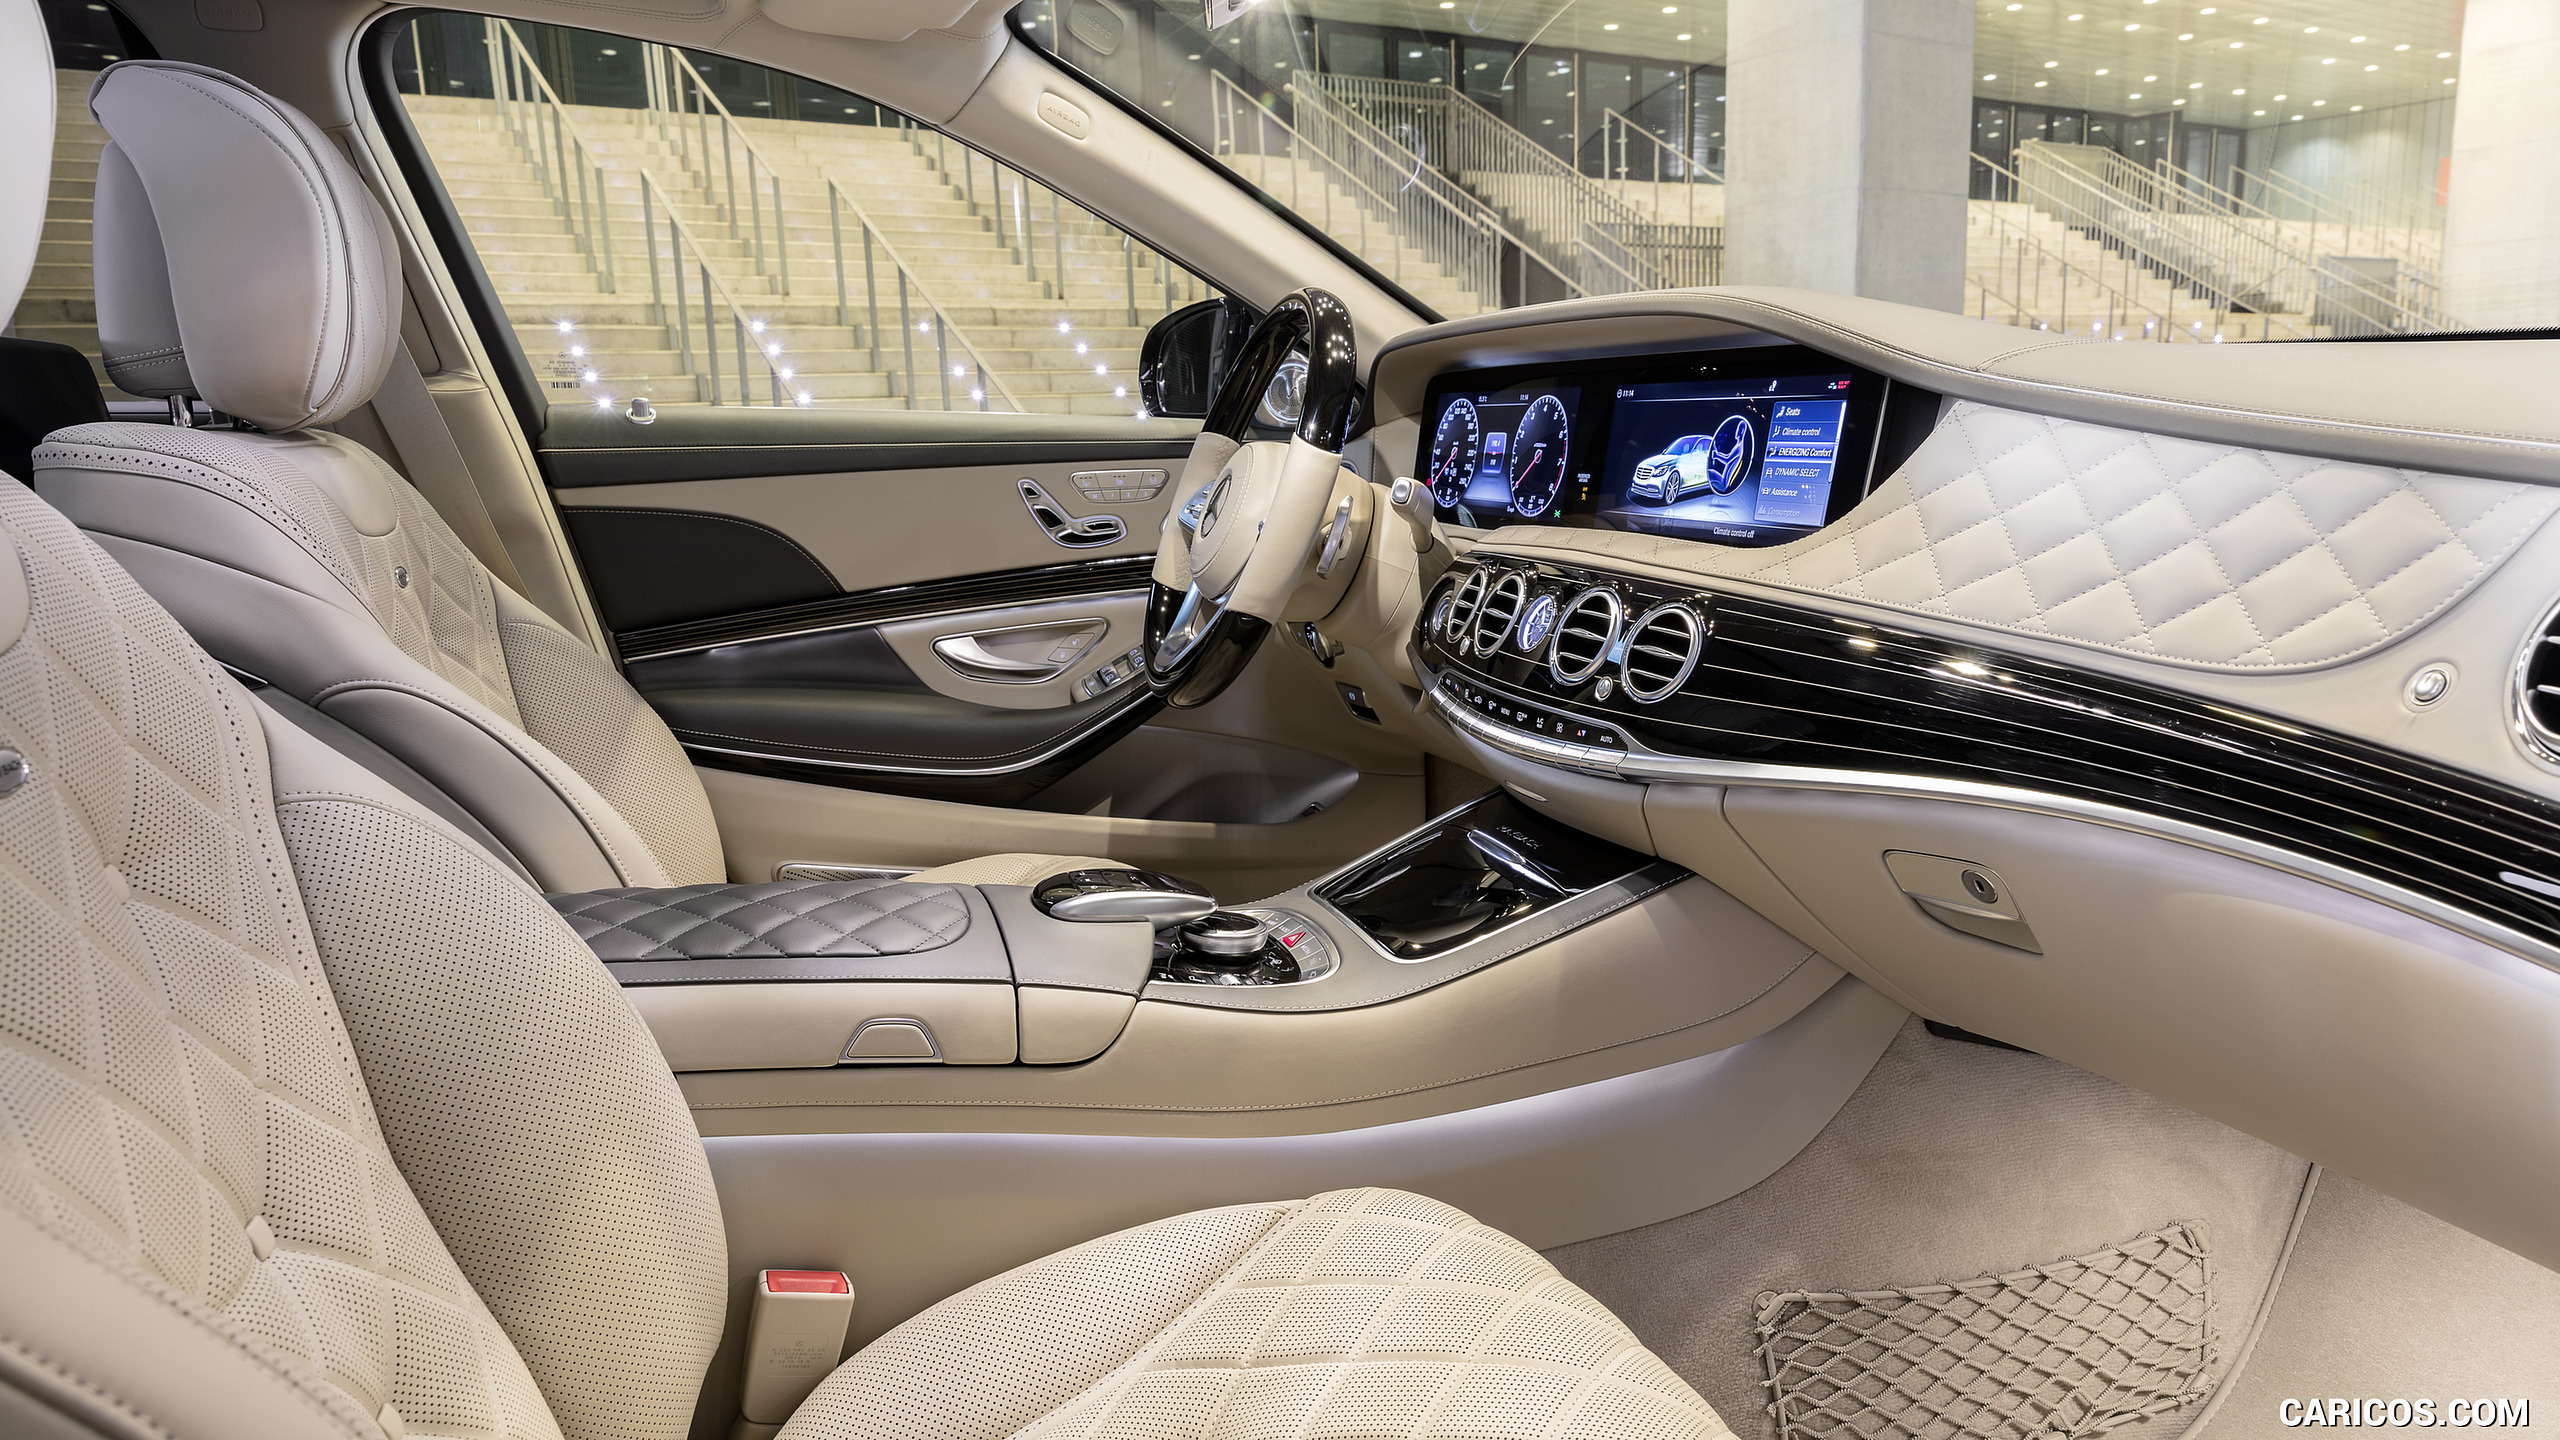 2018 Mercedes-Maybach S560 S-Class 4MATIC - Interior, #12 of 63